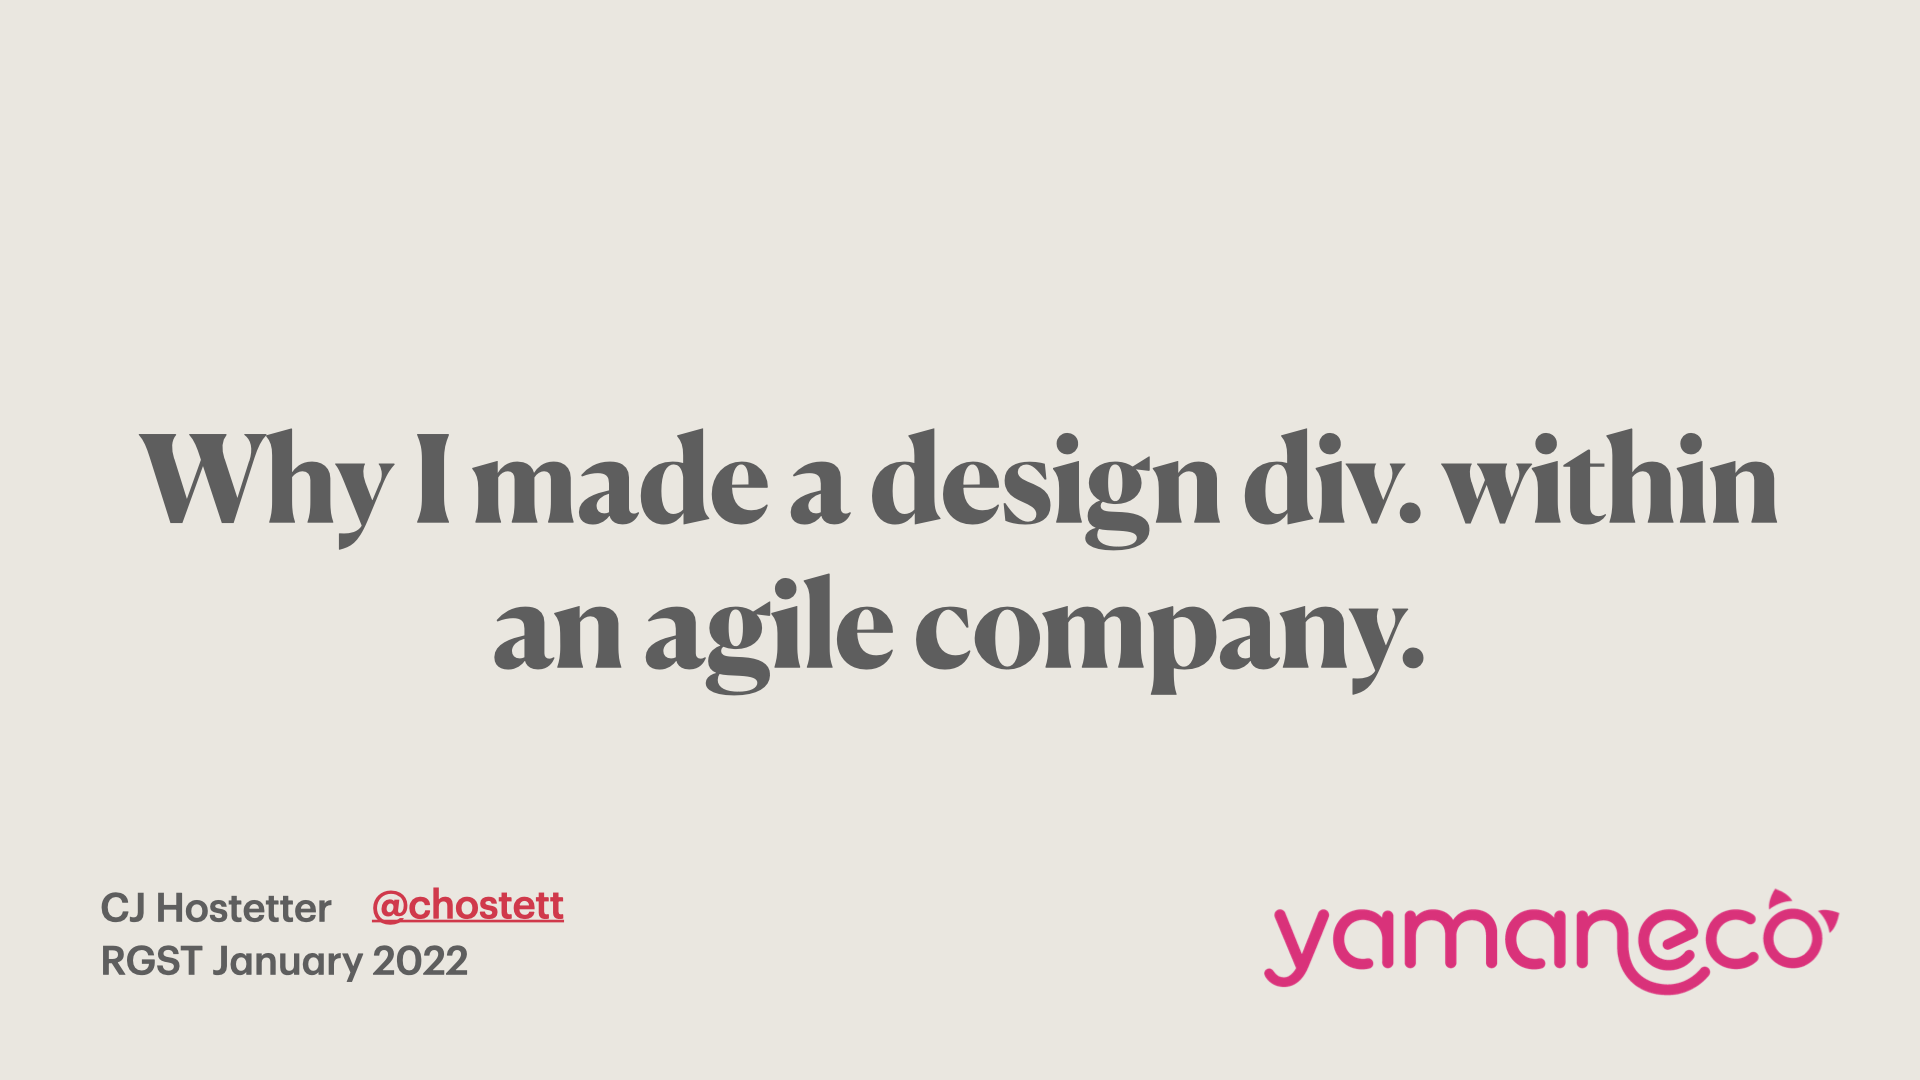 Title slide. Why I made a design div. within an agile company, by CJ Hostetter, @chostett.